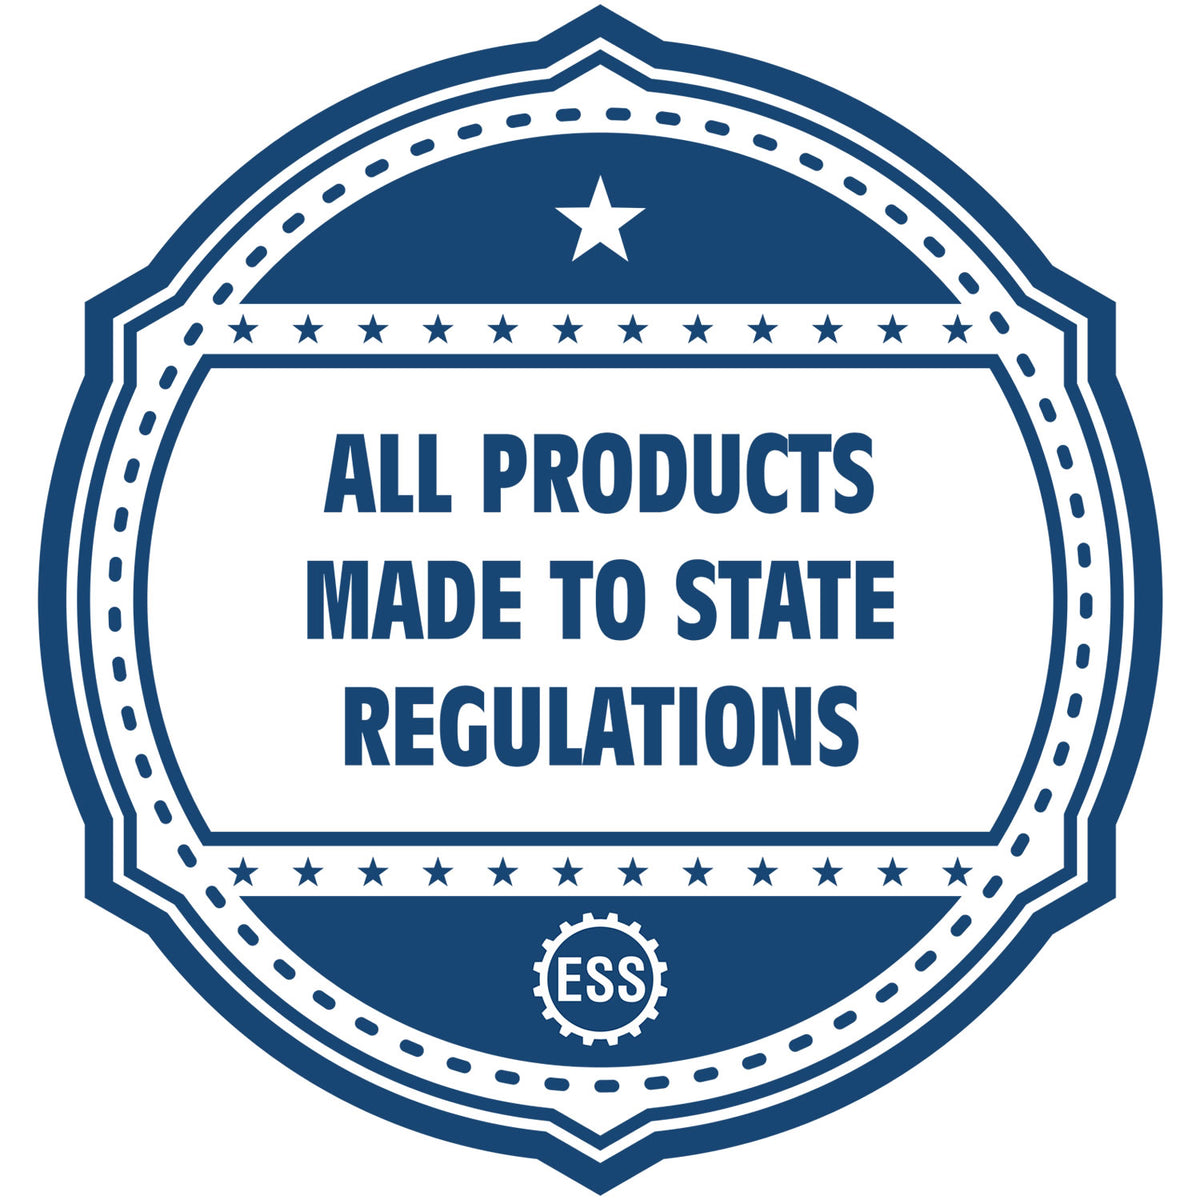 An icon or badge element for the State of Nevada Extended Long Reach Engineer Seal showing that this product is made in compliance with state regulations.